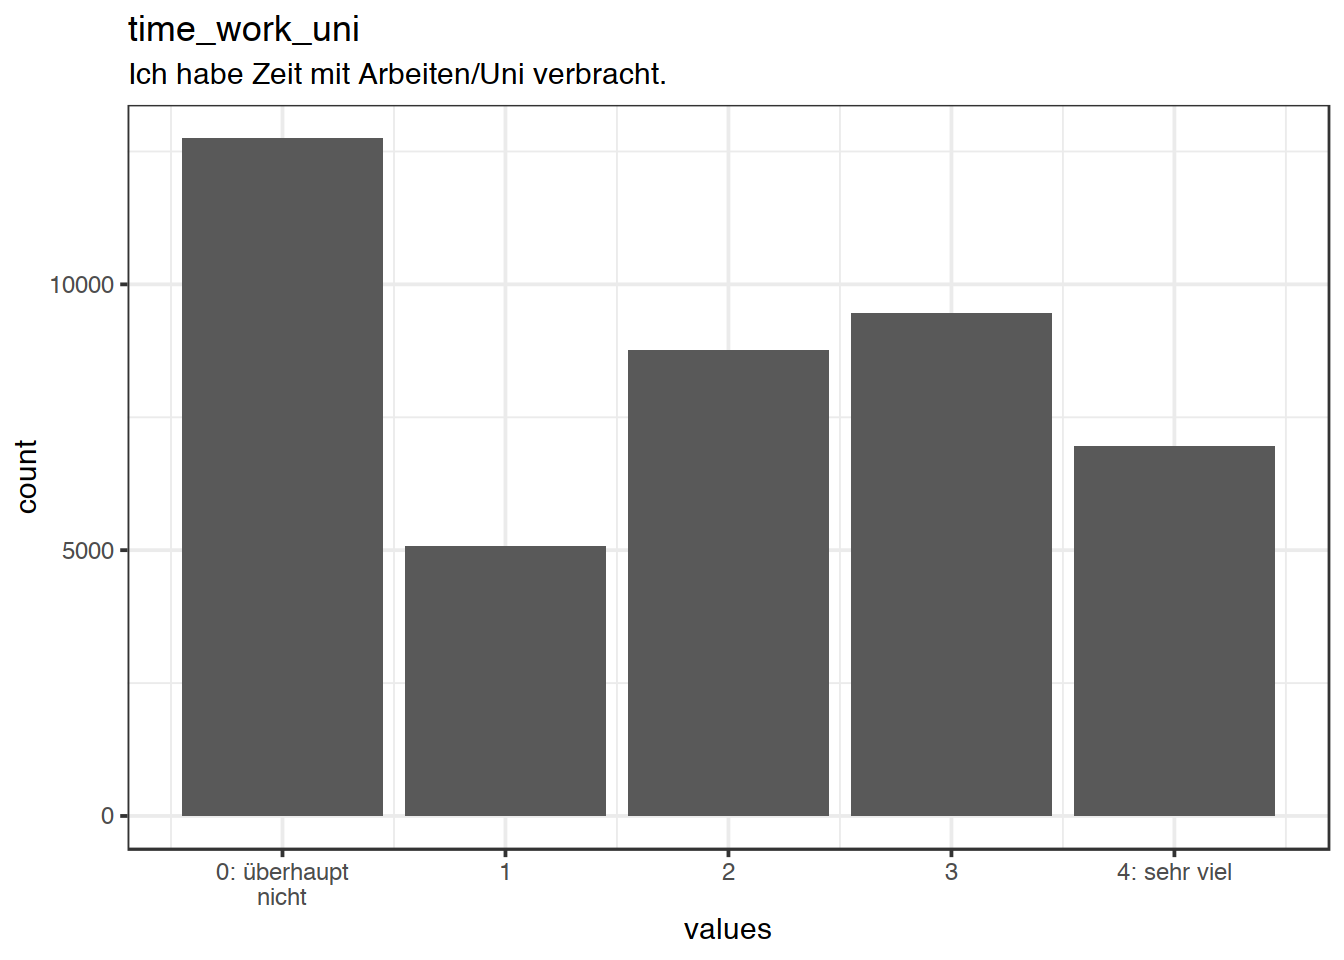 Distribution of values for time_work_uni